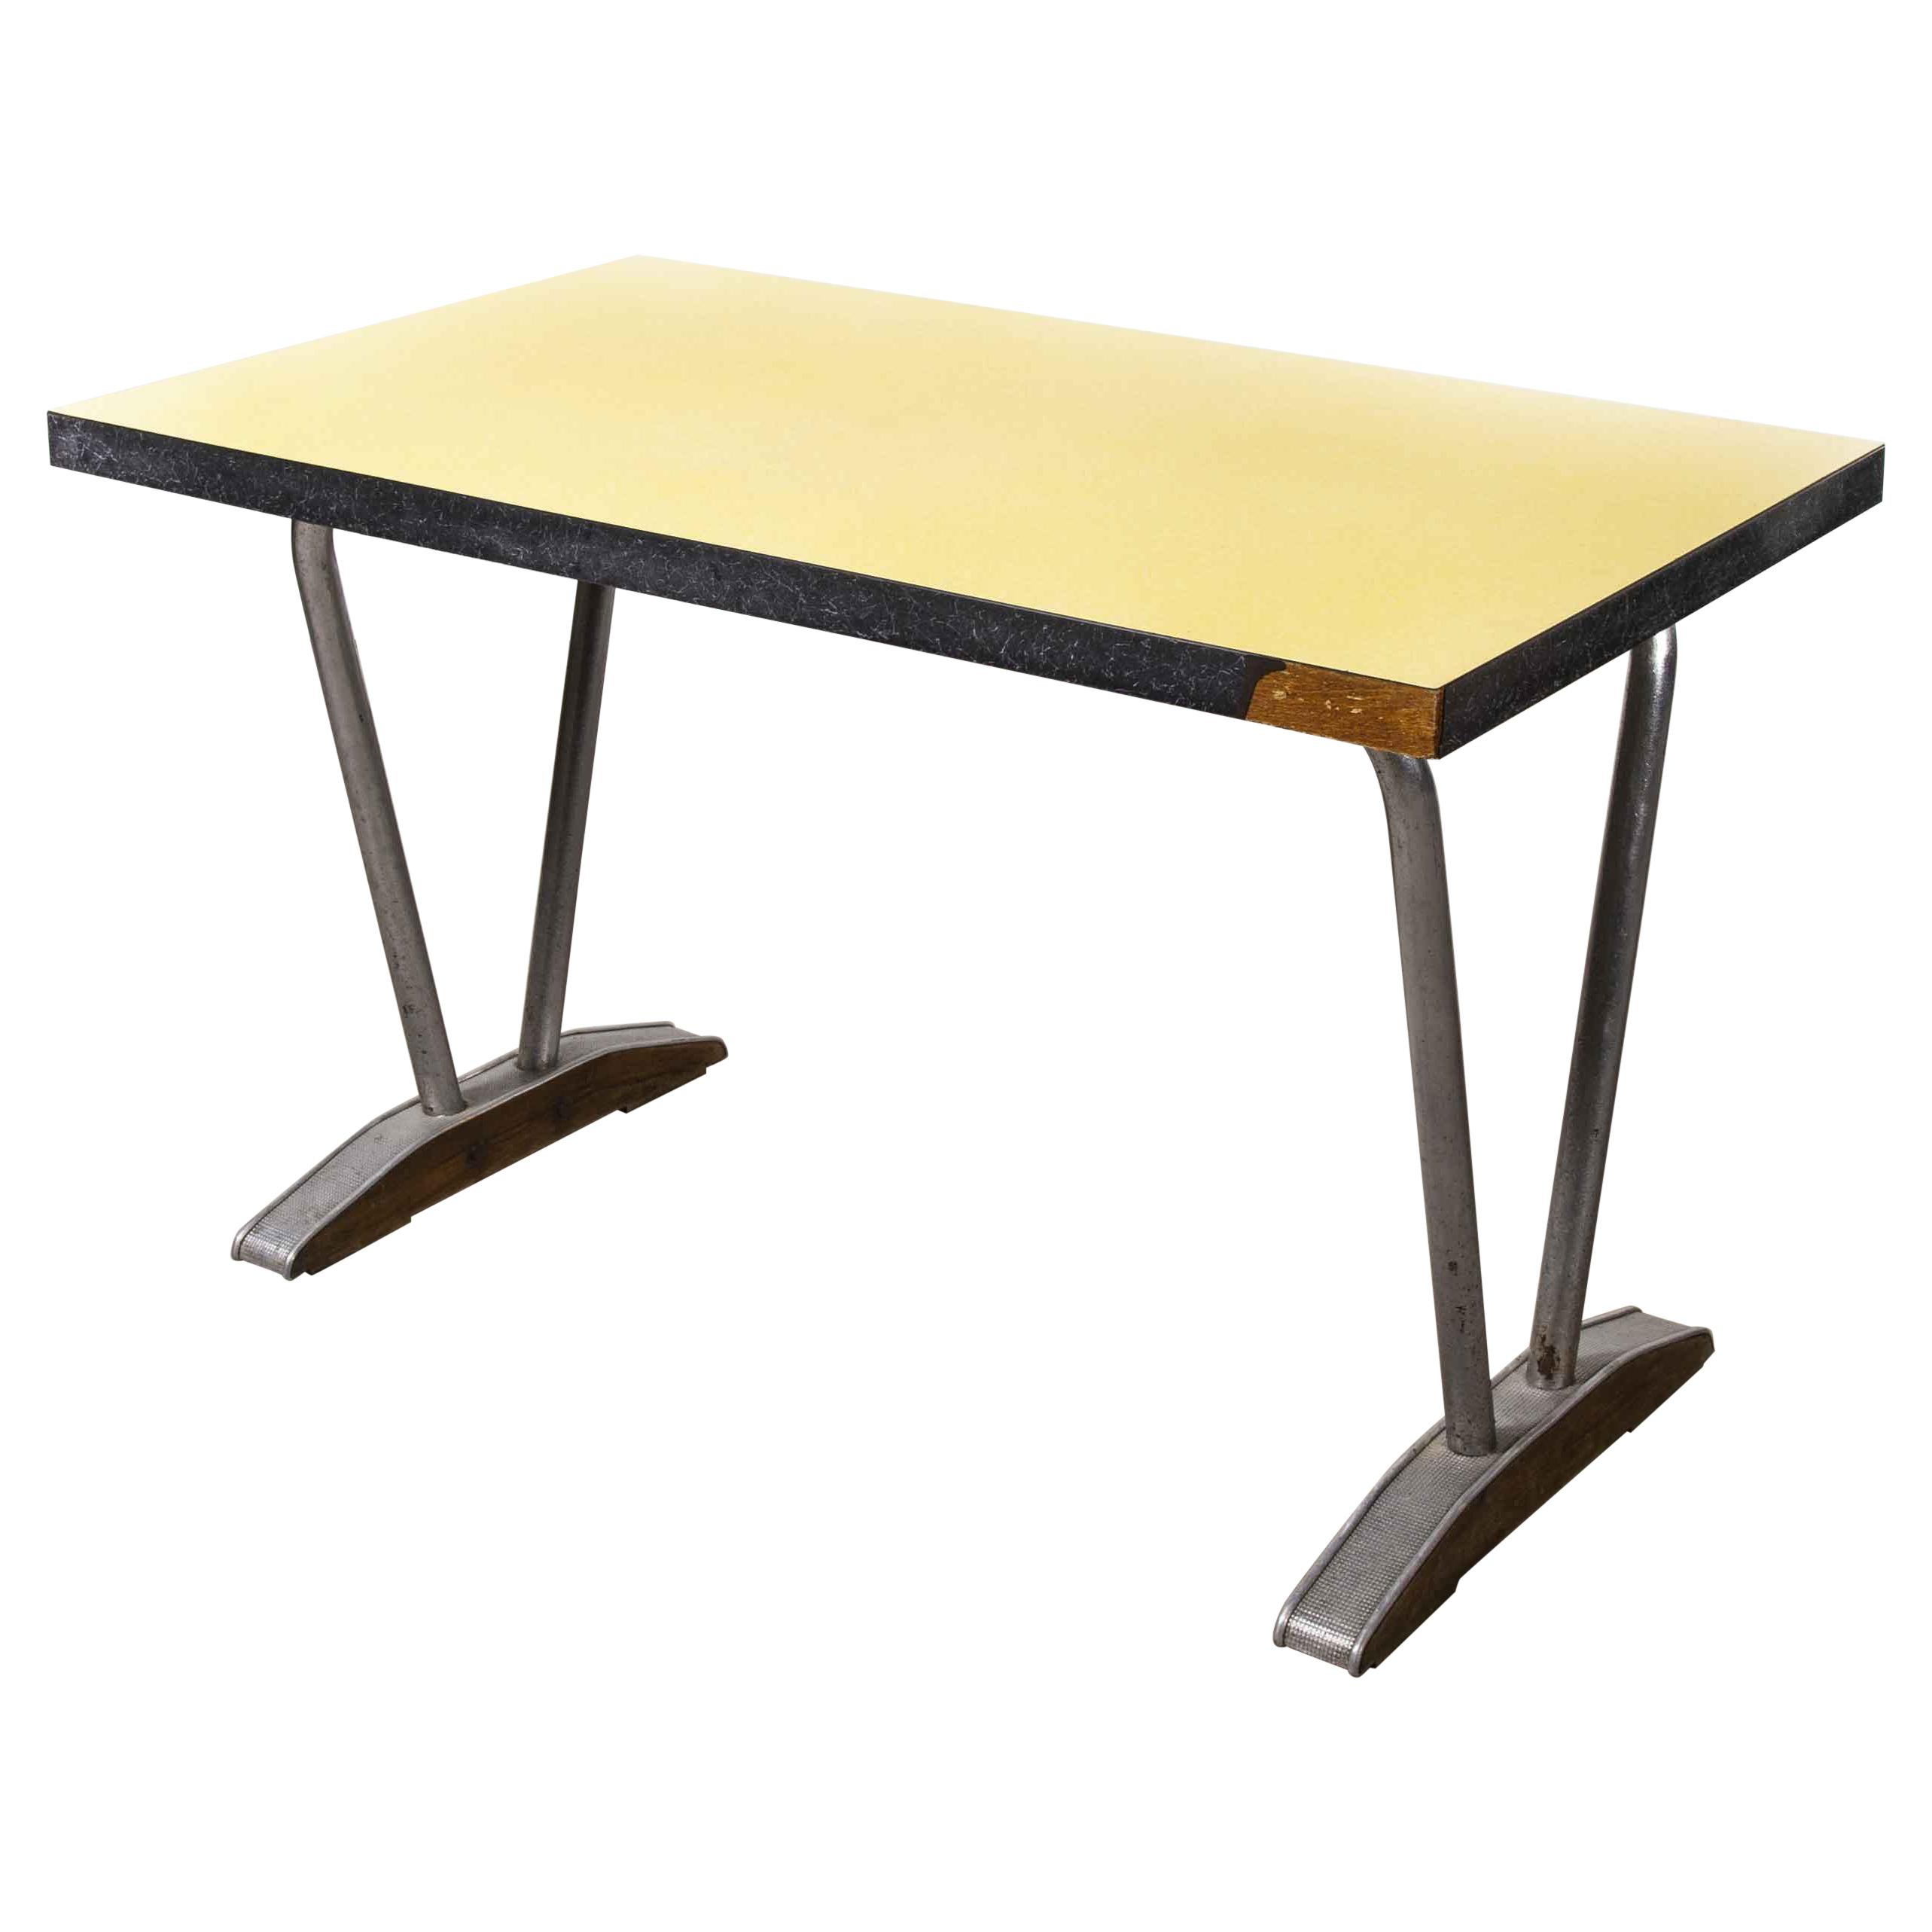 1960’s French Yellow Laminate Dining Table with Aluminium Base, 'Model 779.2'